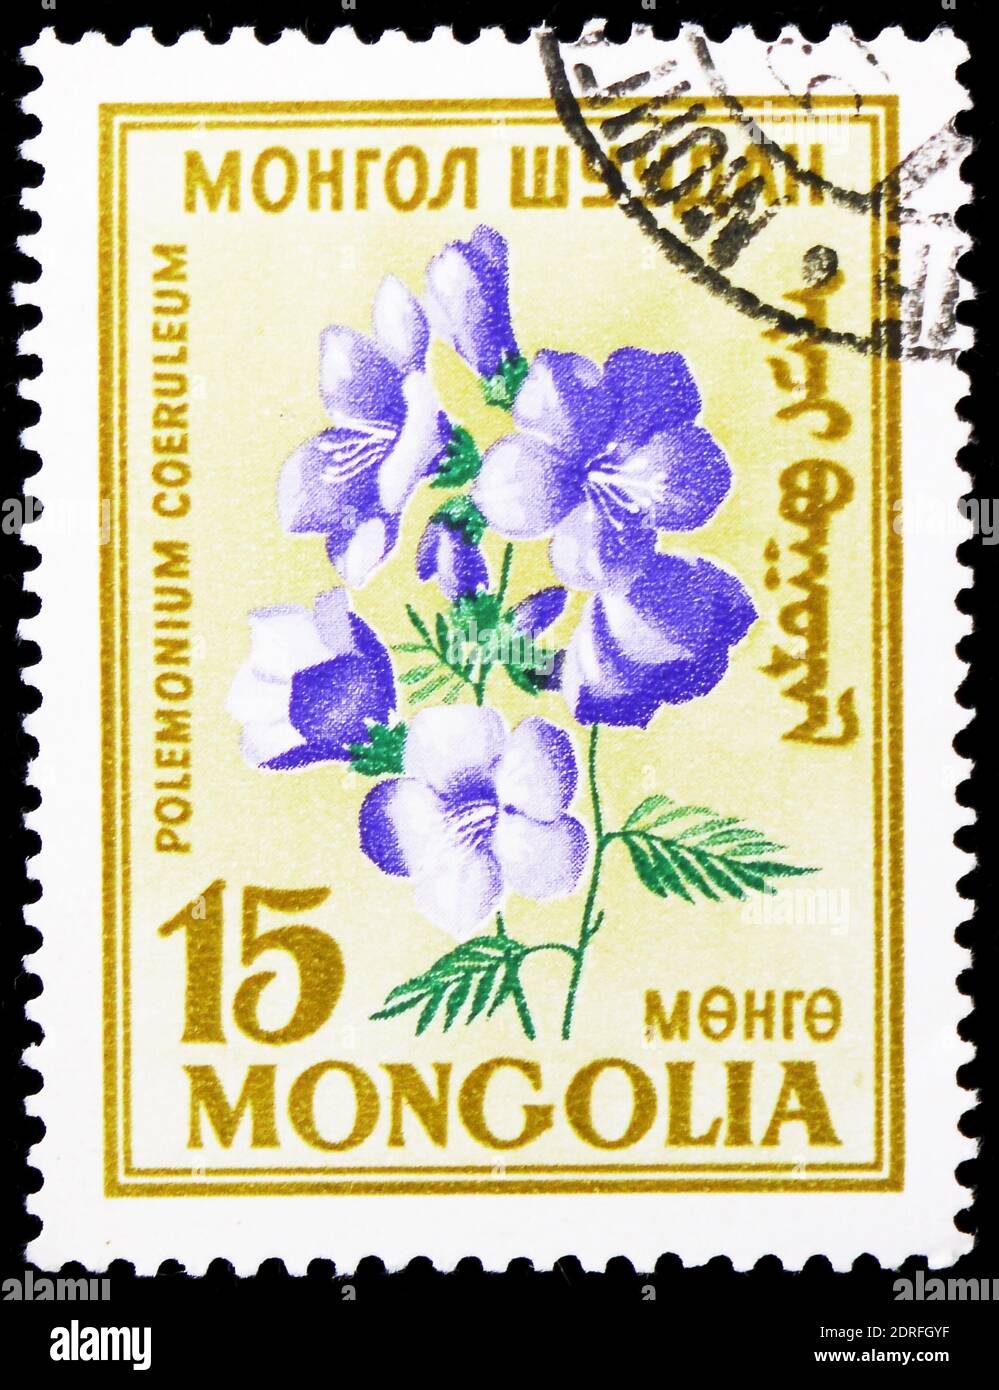 MOSCOW, RUSSIA - JANUARY 4, 2019: A stamp printed in Mongolia shows Polemonium caeruleum, Flowers serie, circa 1960 Stock Photo